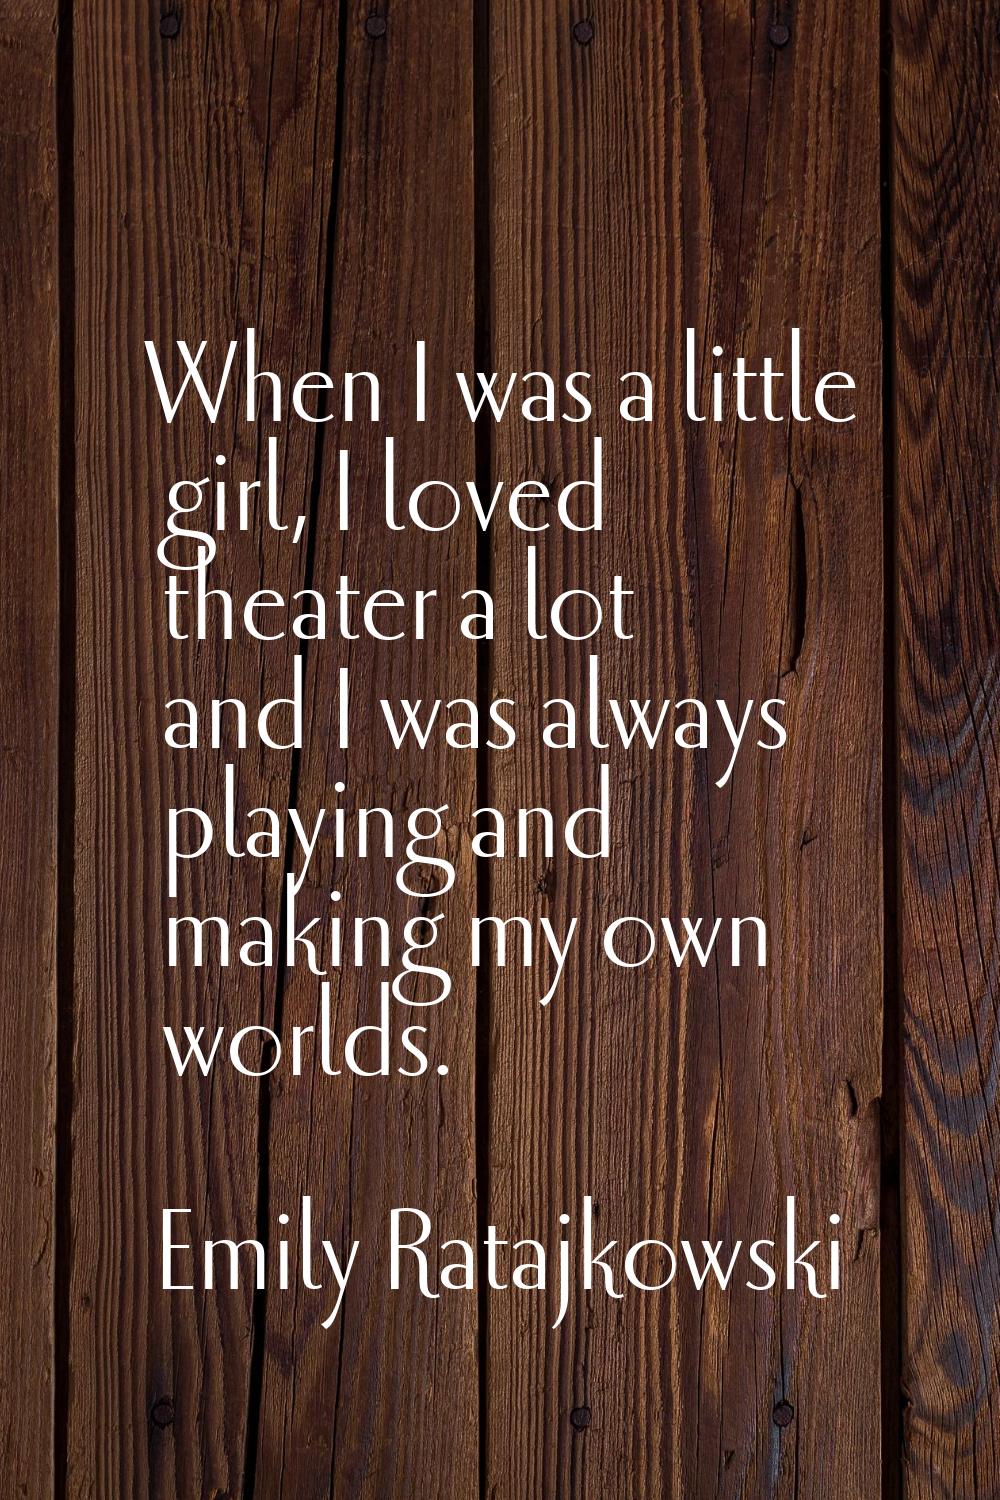 When I was a little girl, I loved theater a lot and I was always playing and making my own worlds.